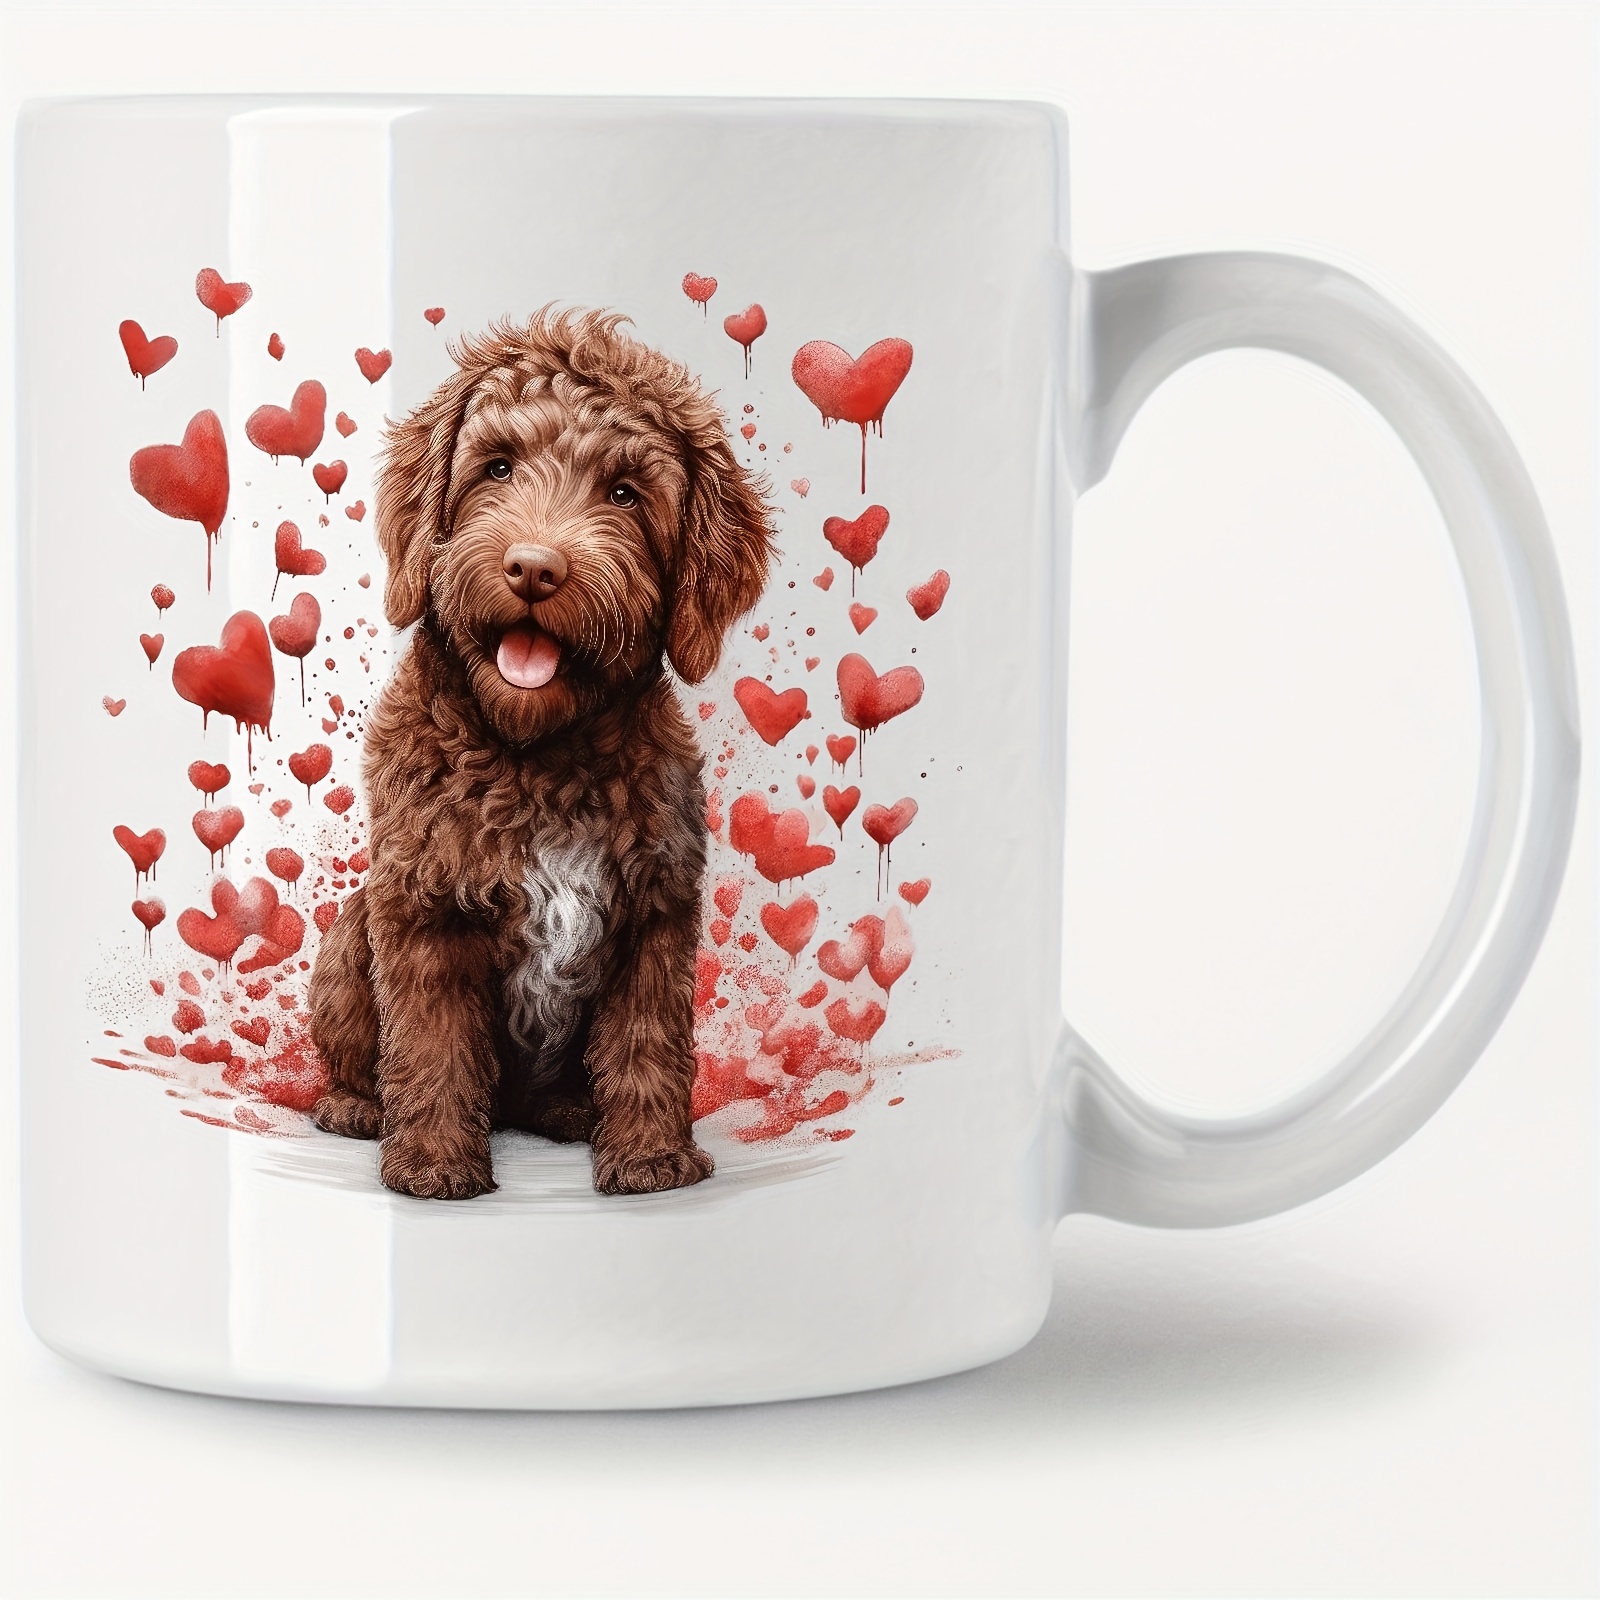 

11oz Ceramic Coffee Mug With Spanish Water Dog Design - Dishwasher And Microwave Safe - Ideal Gift For Pet Lovers, Friends, And Family (1pc)